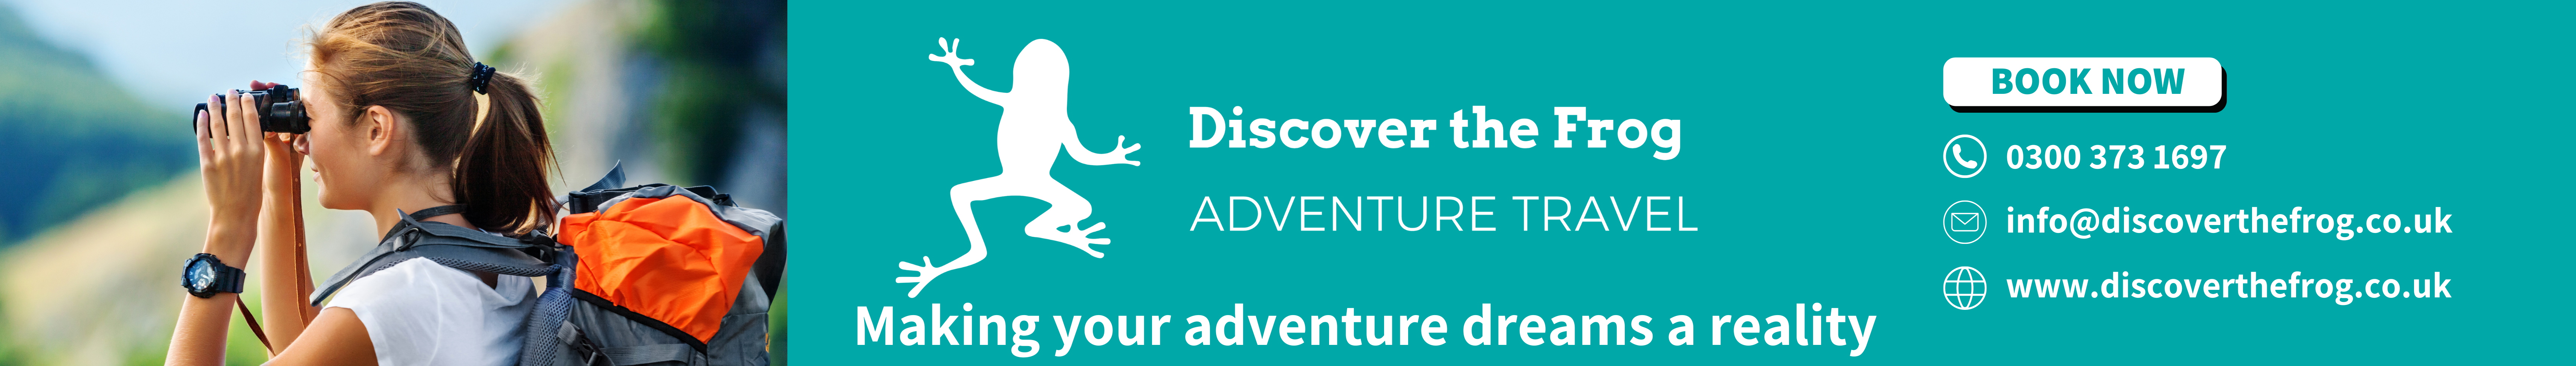 Discover the Frog Adventure Travel